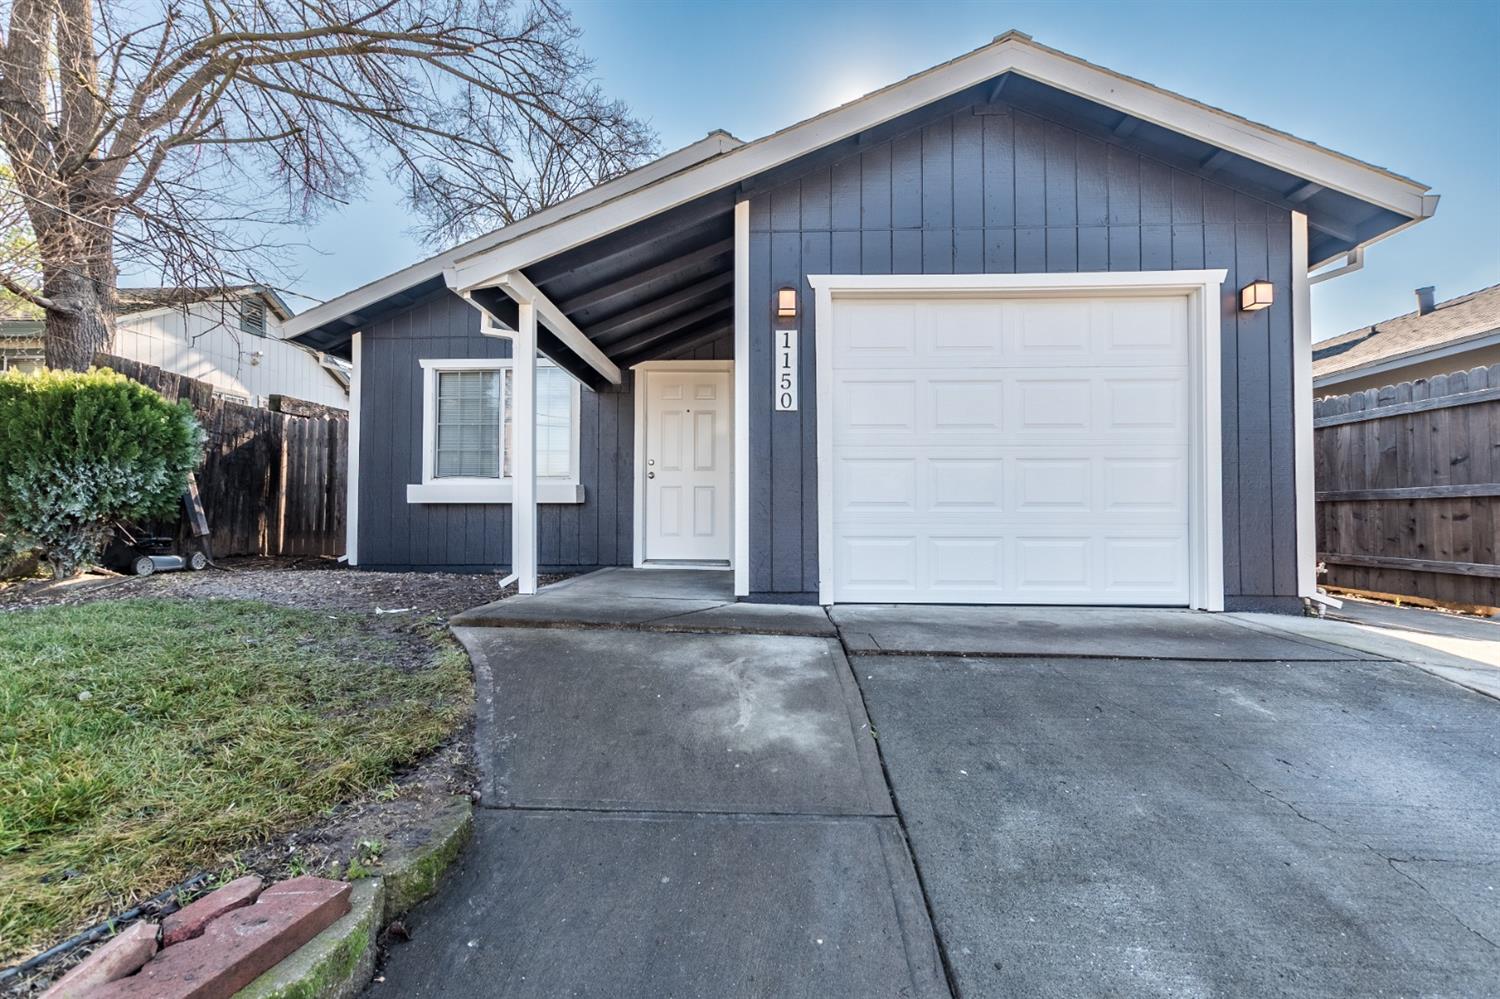 And here it is, a newly remodeled 3 bedroom, 1 bath home with a 1 garage. All you need to bring is your family and your furniture, as this home has new granite countertops, a new electric and stainless-steel oven, new flooring, new paint and more!